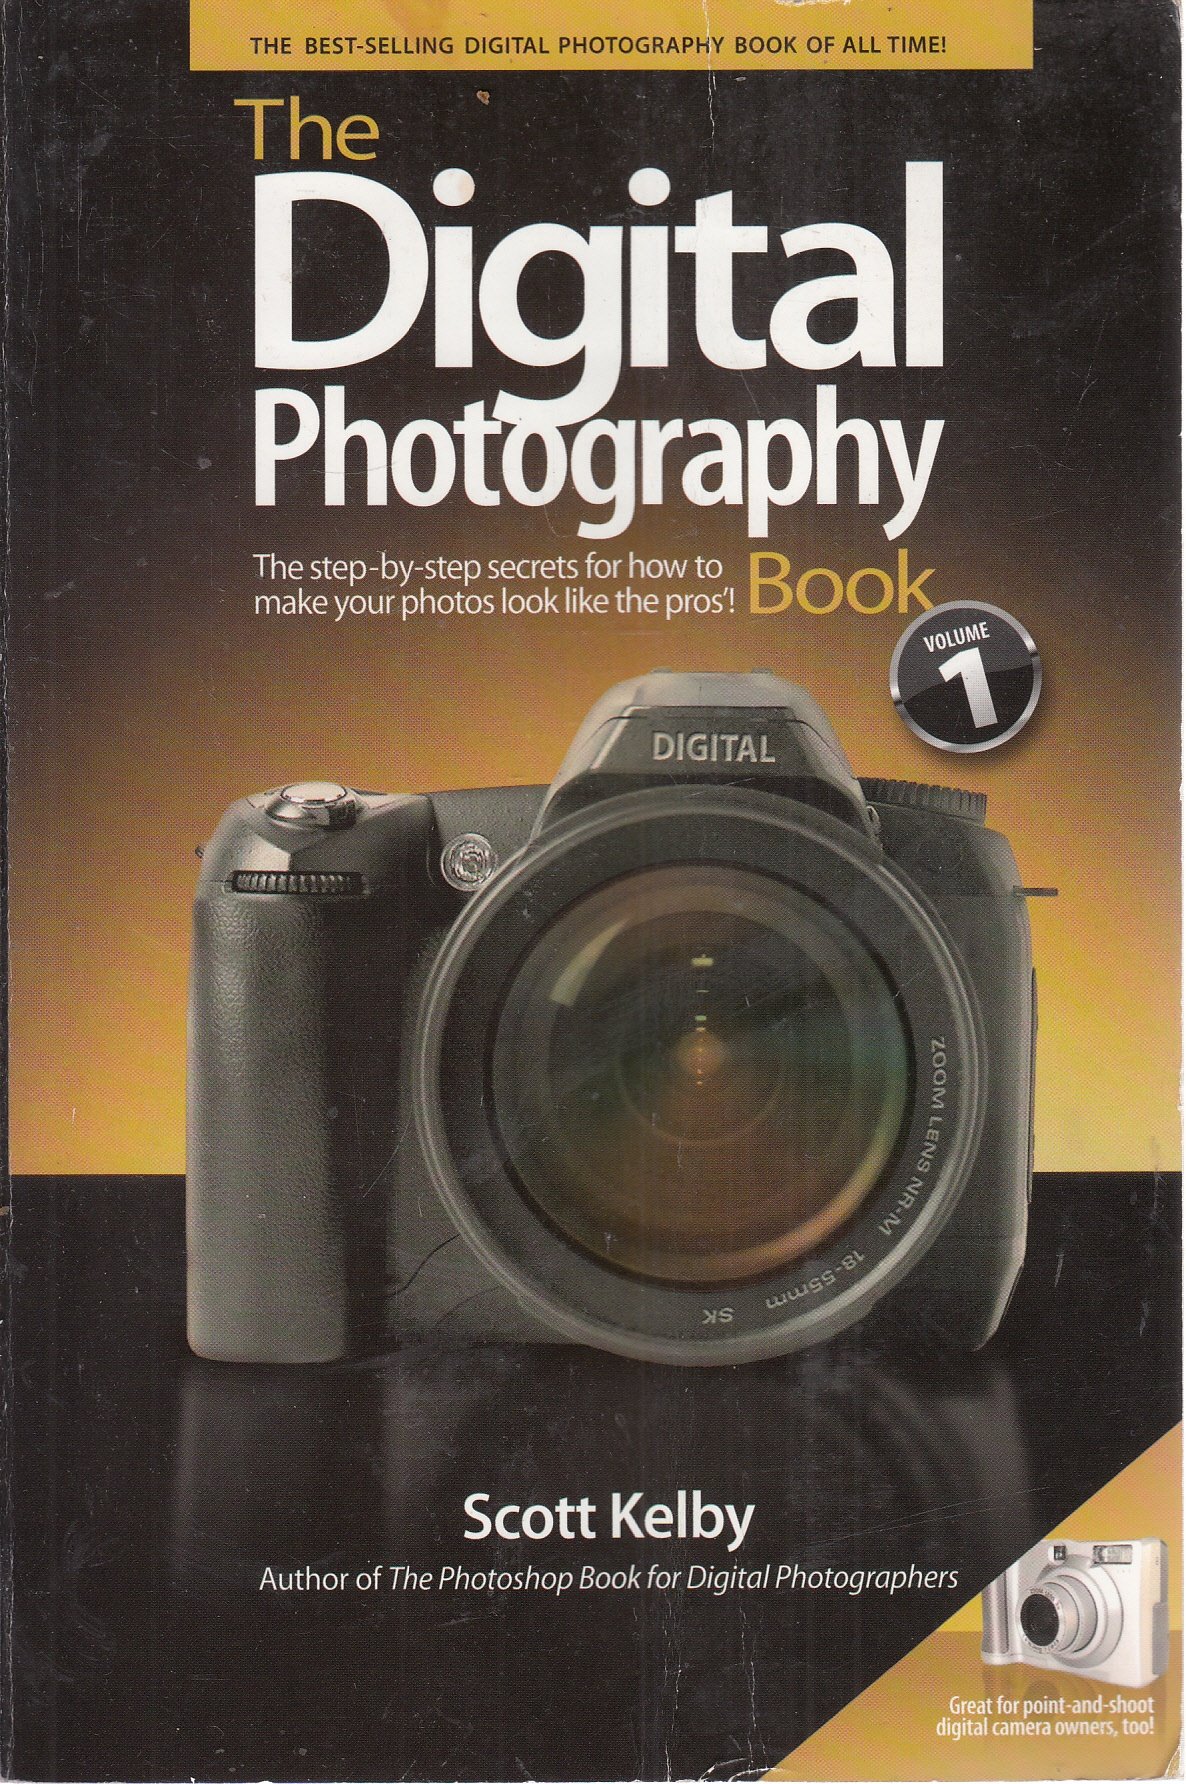 The Digital Photography Book - image 1 of 1